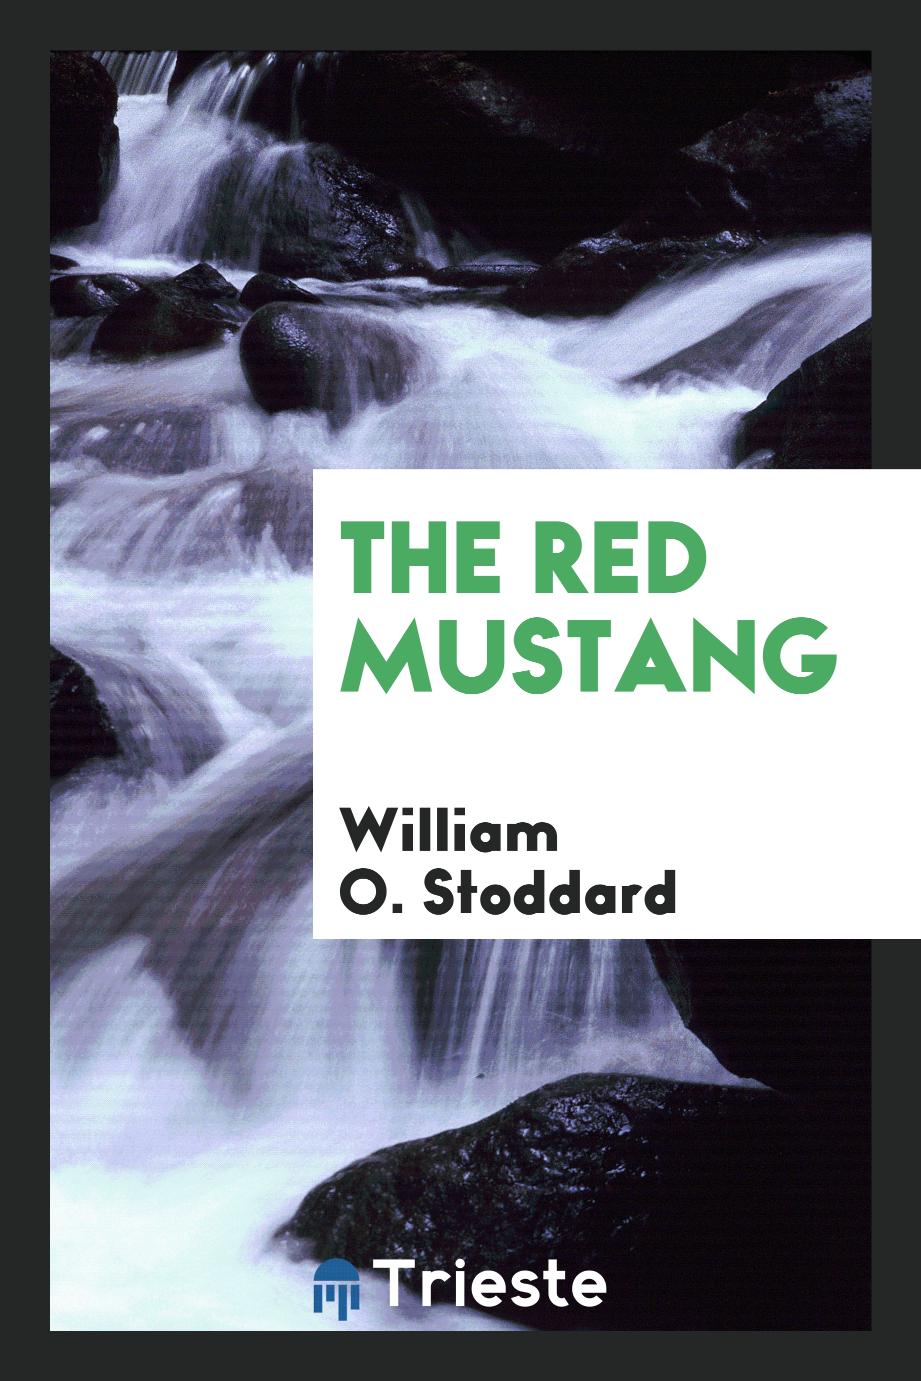 The red mustang